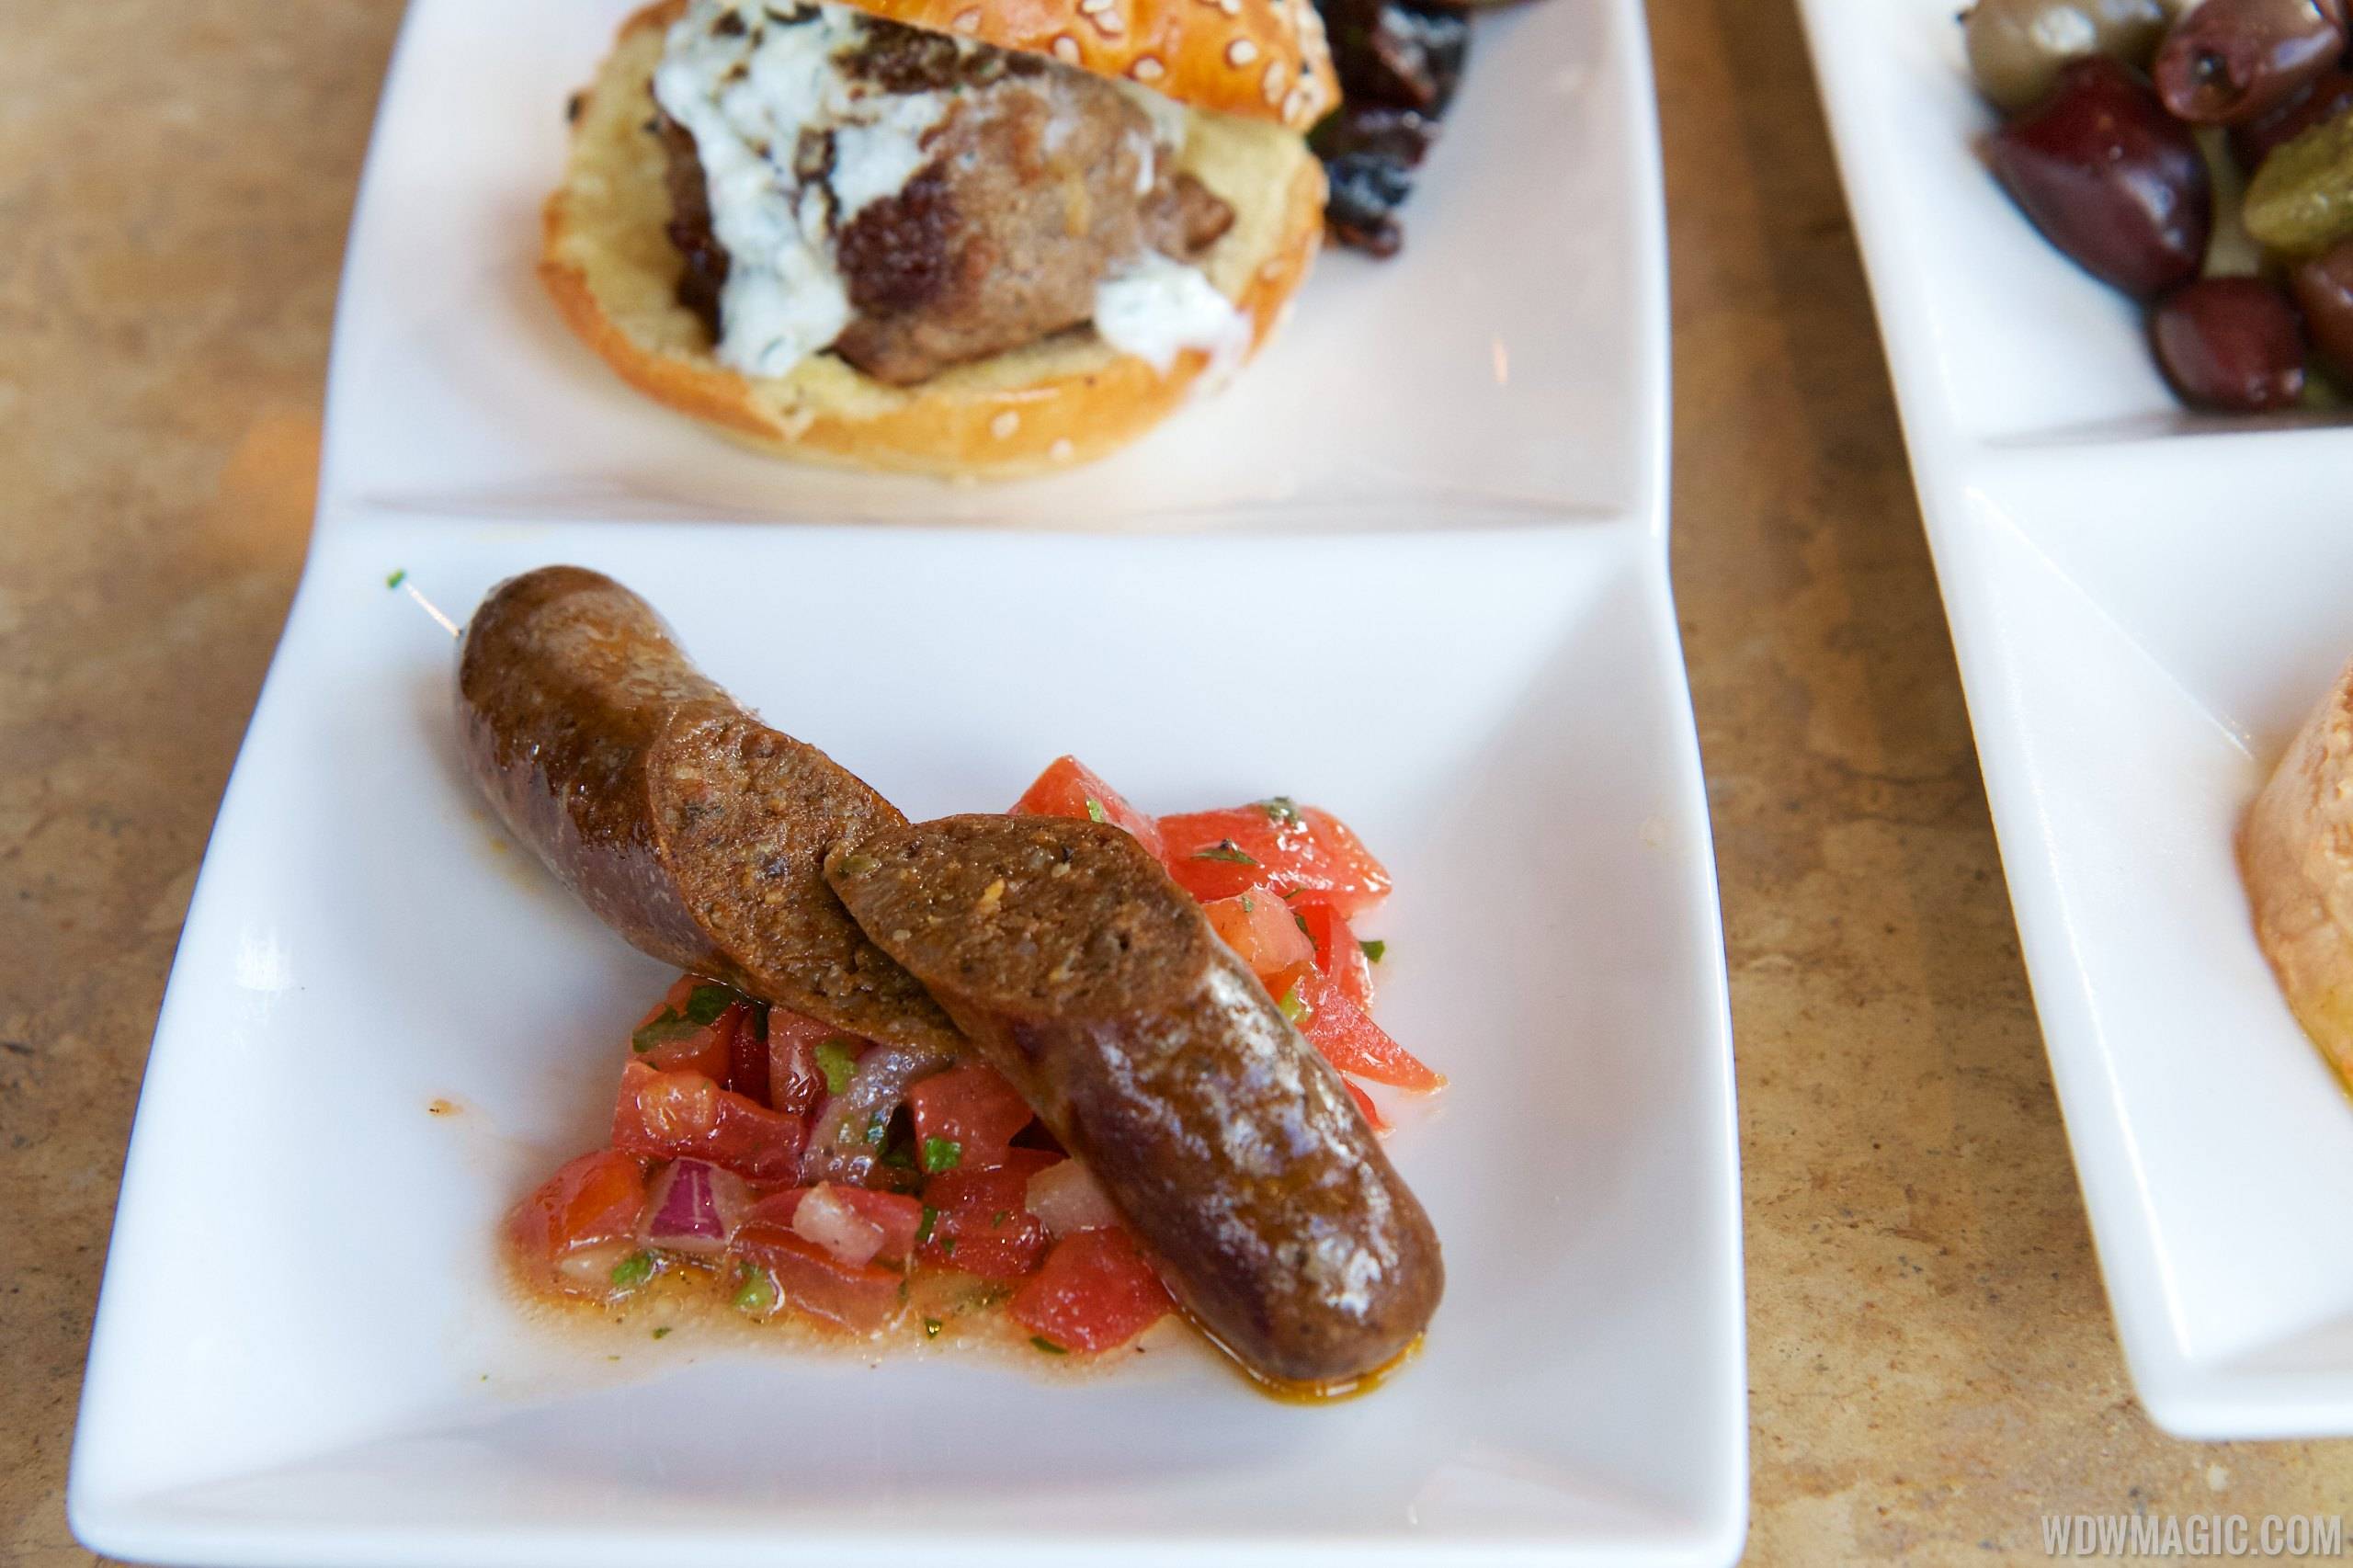 Spice Road Table - Merguez Sausage from the Tingis Sampler $16